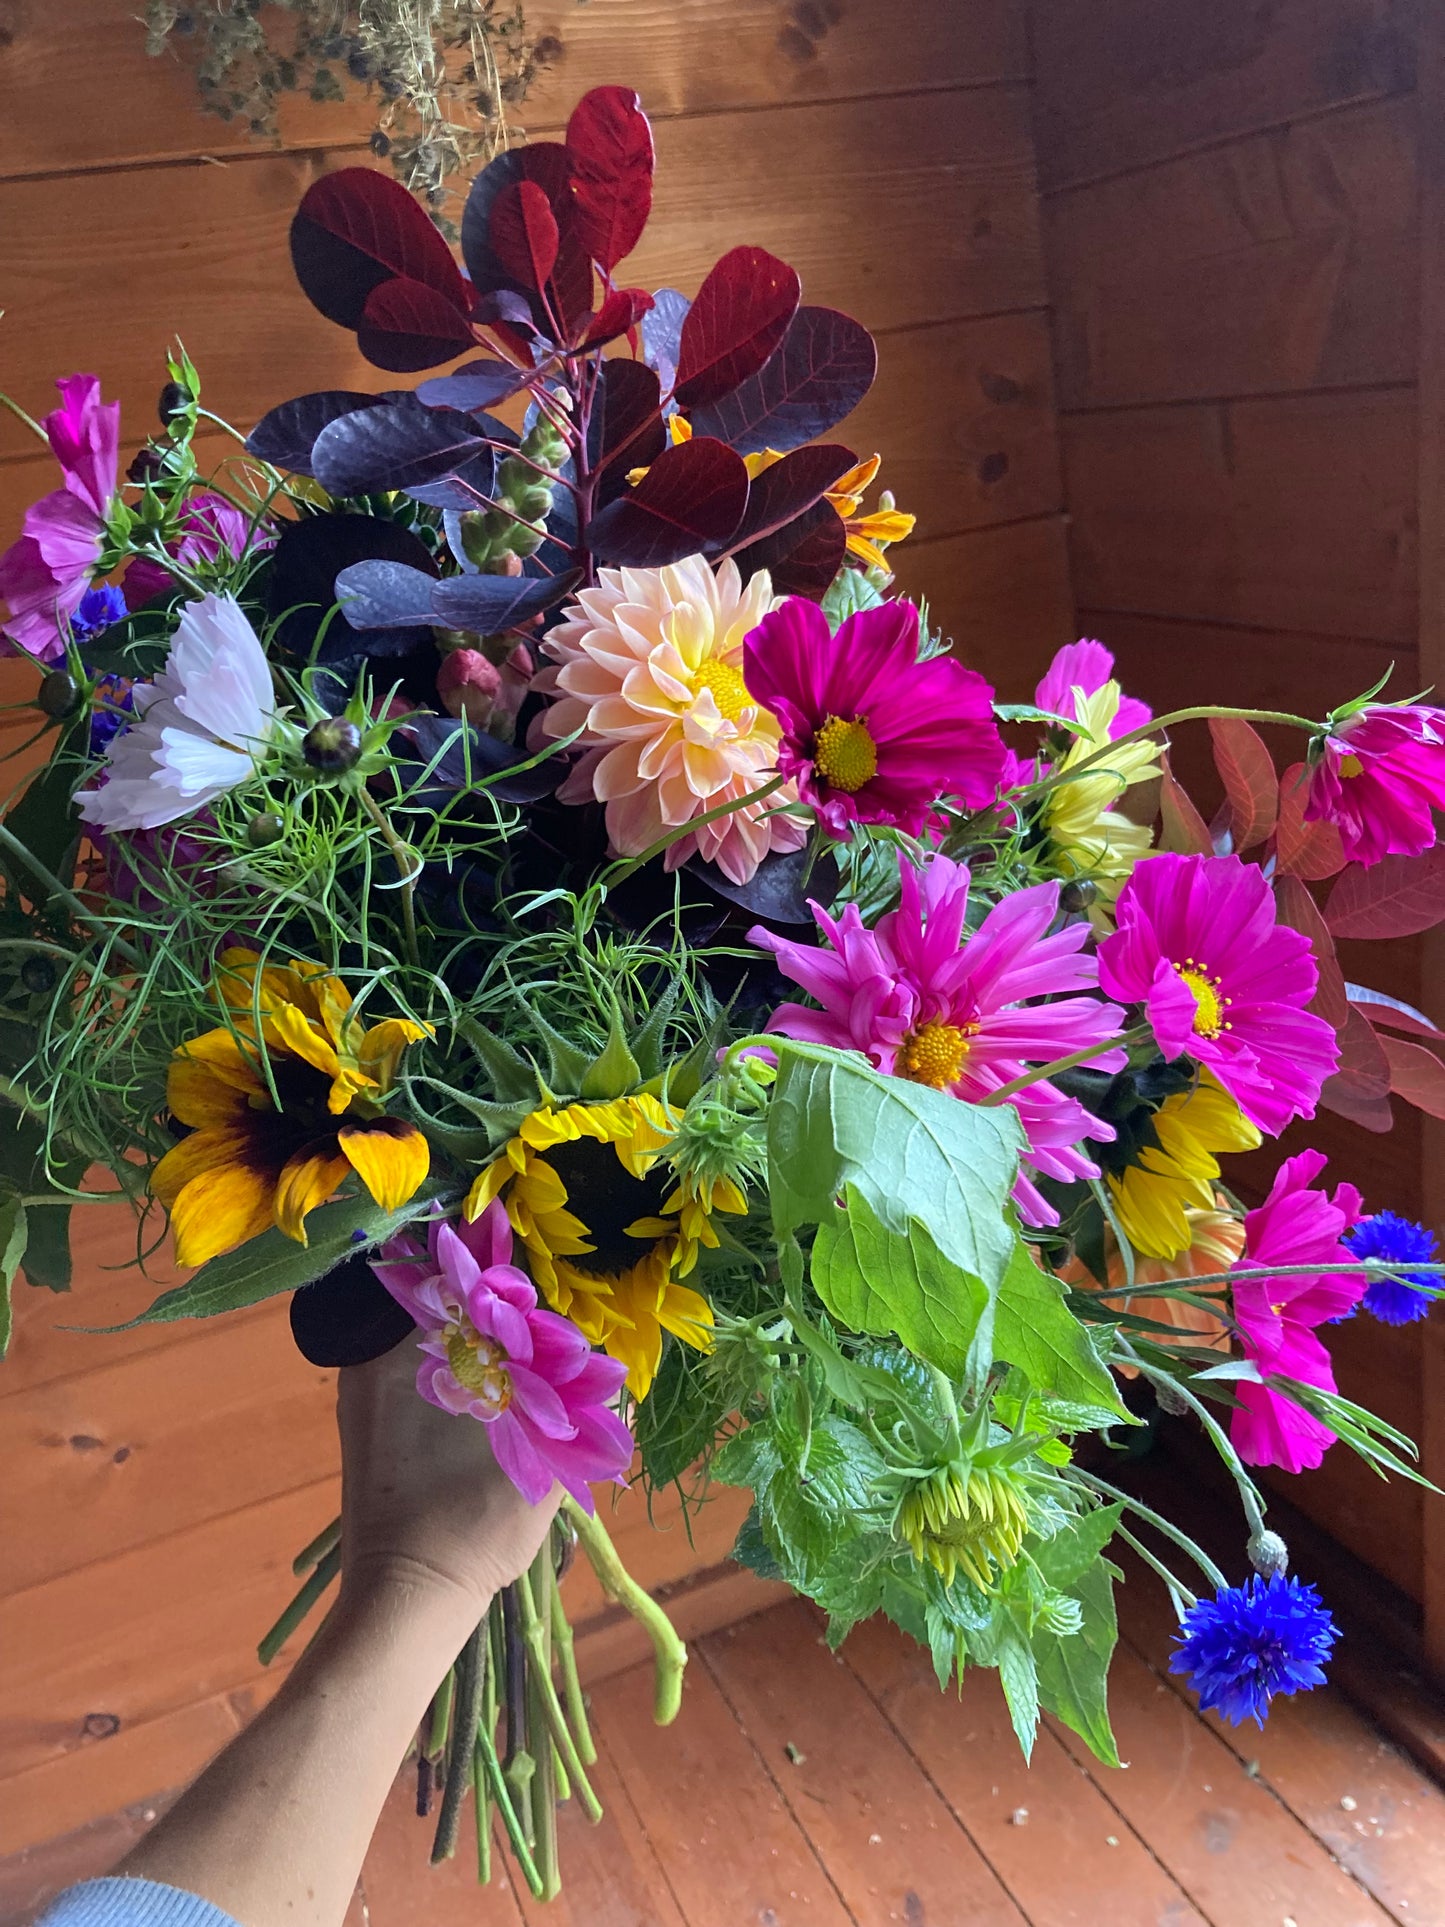 Monthly flower subscription - 6 months